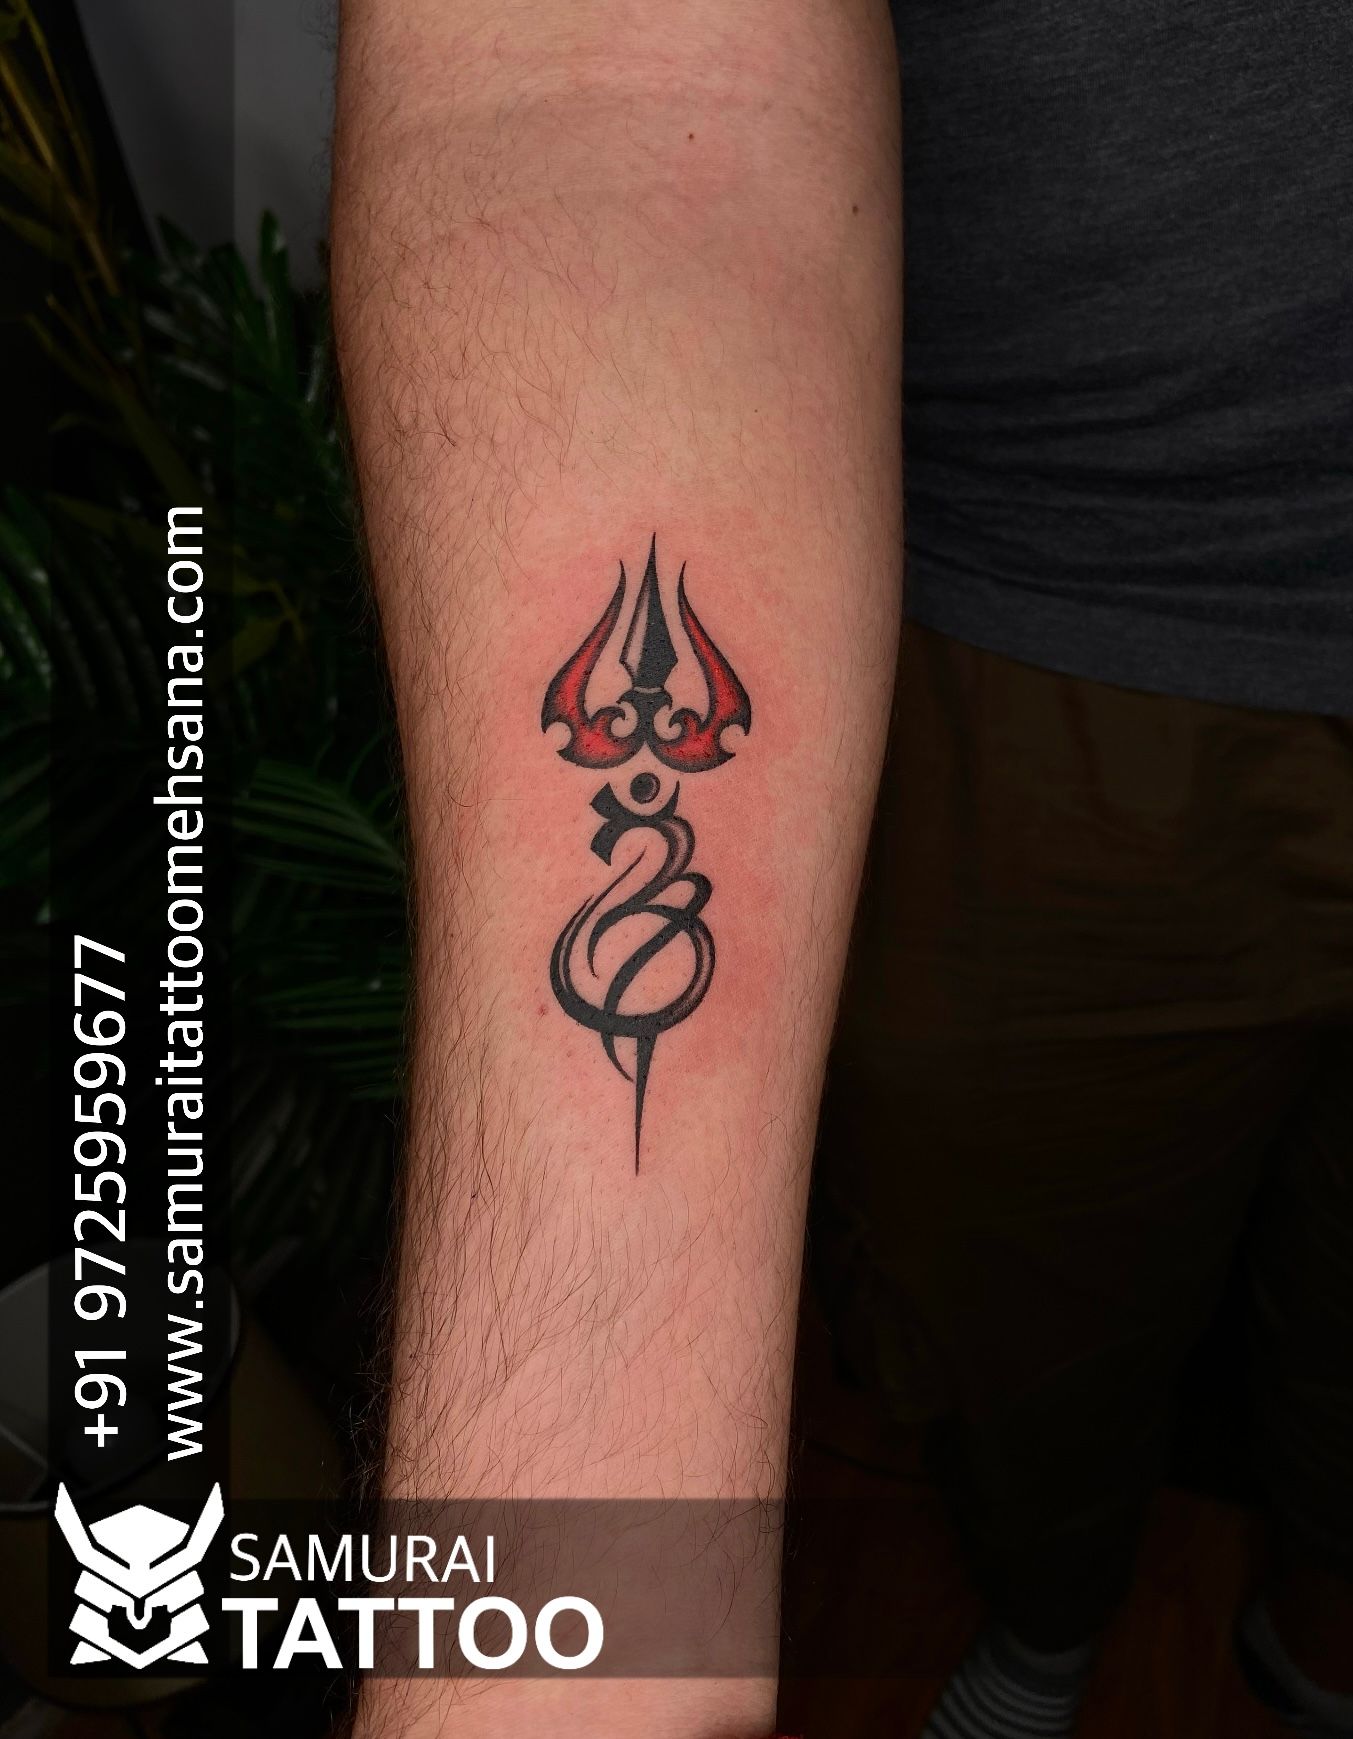 Everything You Need To Know About Trishul  Tattooshttpswwwalienstattoocomposteverythingyouneedtoknowabout trishultattoos